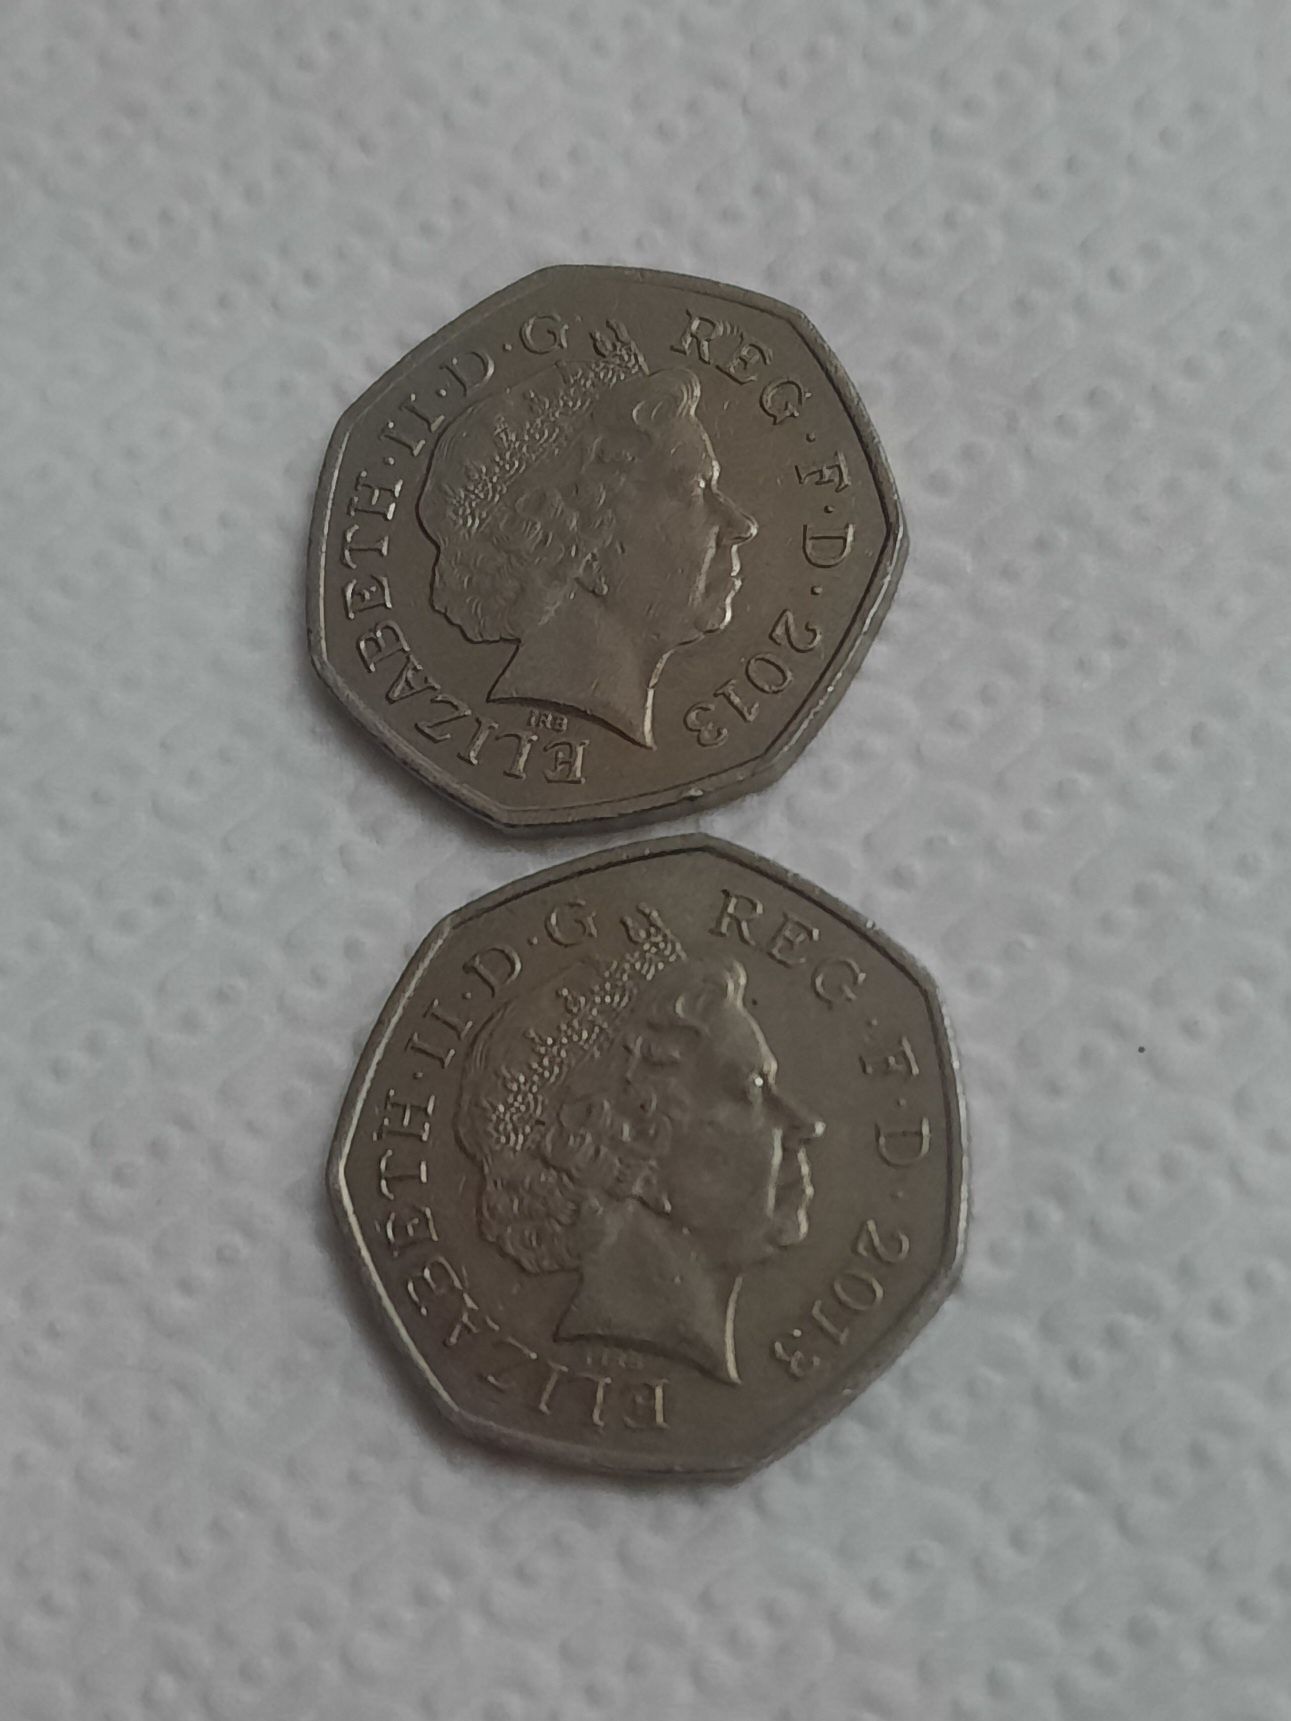 Lot monede fifty pence 2013